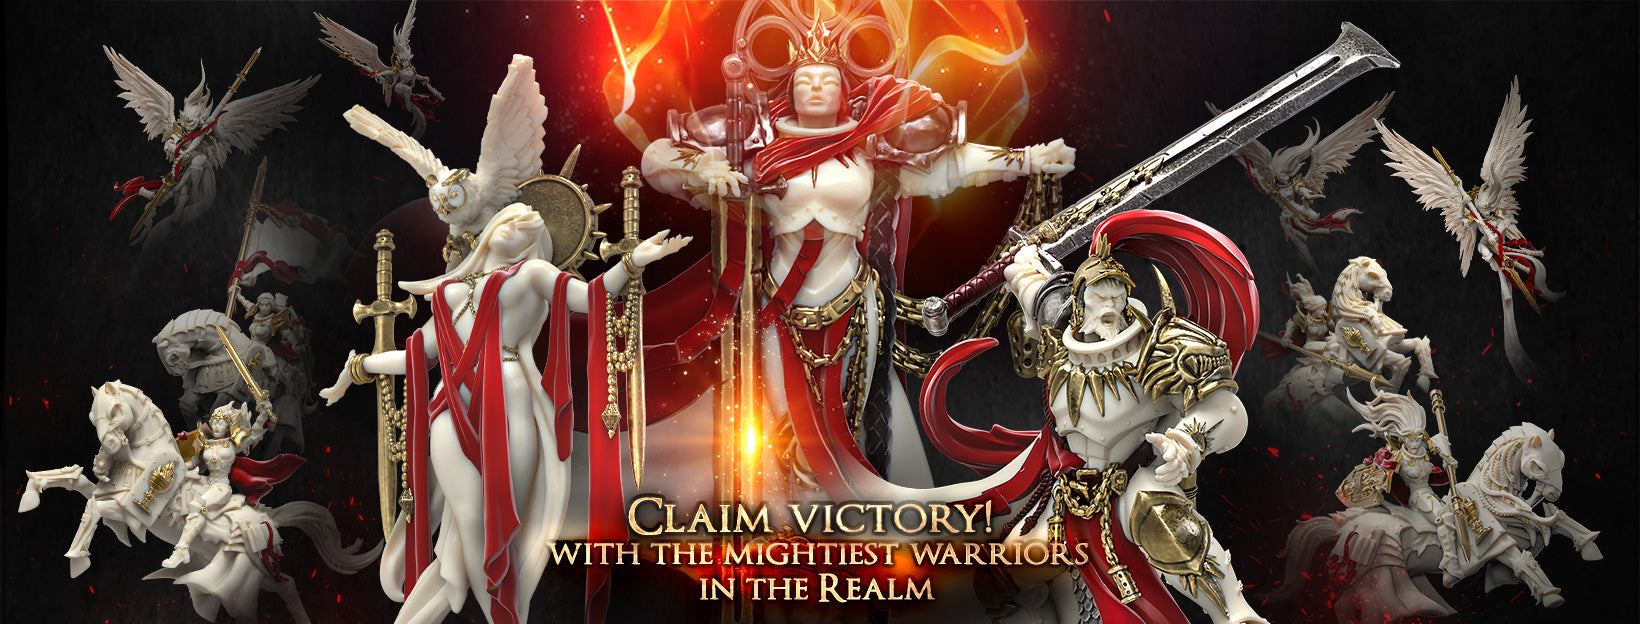 Meet the Mightiest Warriors in the Realm